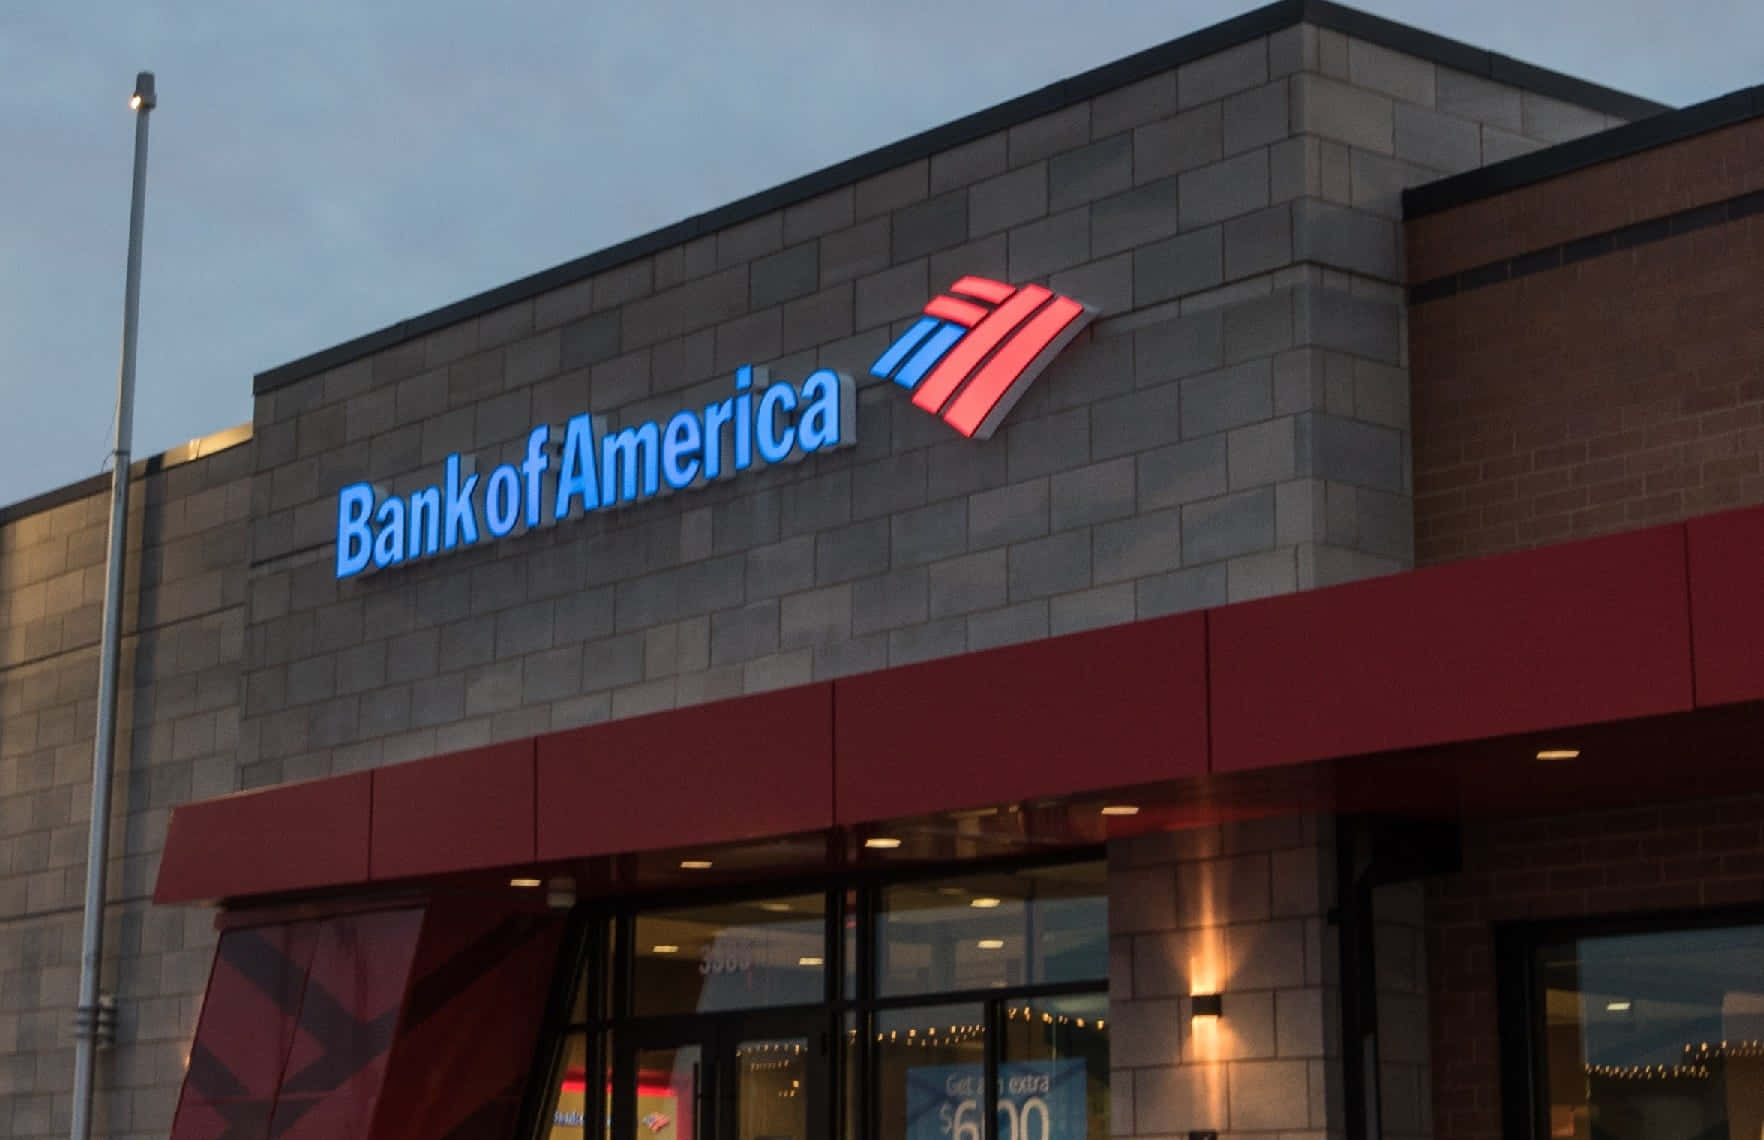 Bank of America: Invest in Your Future